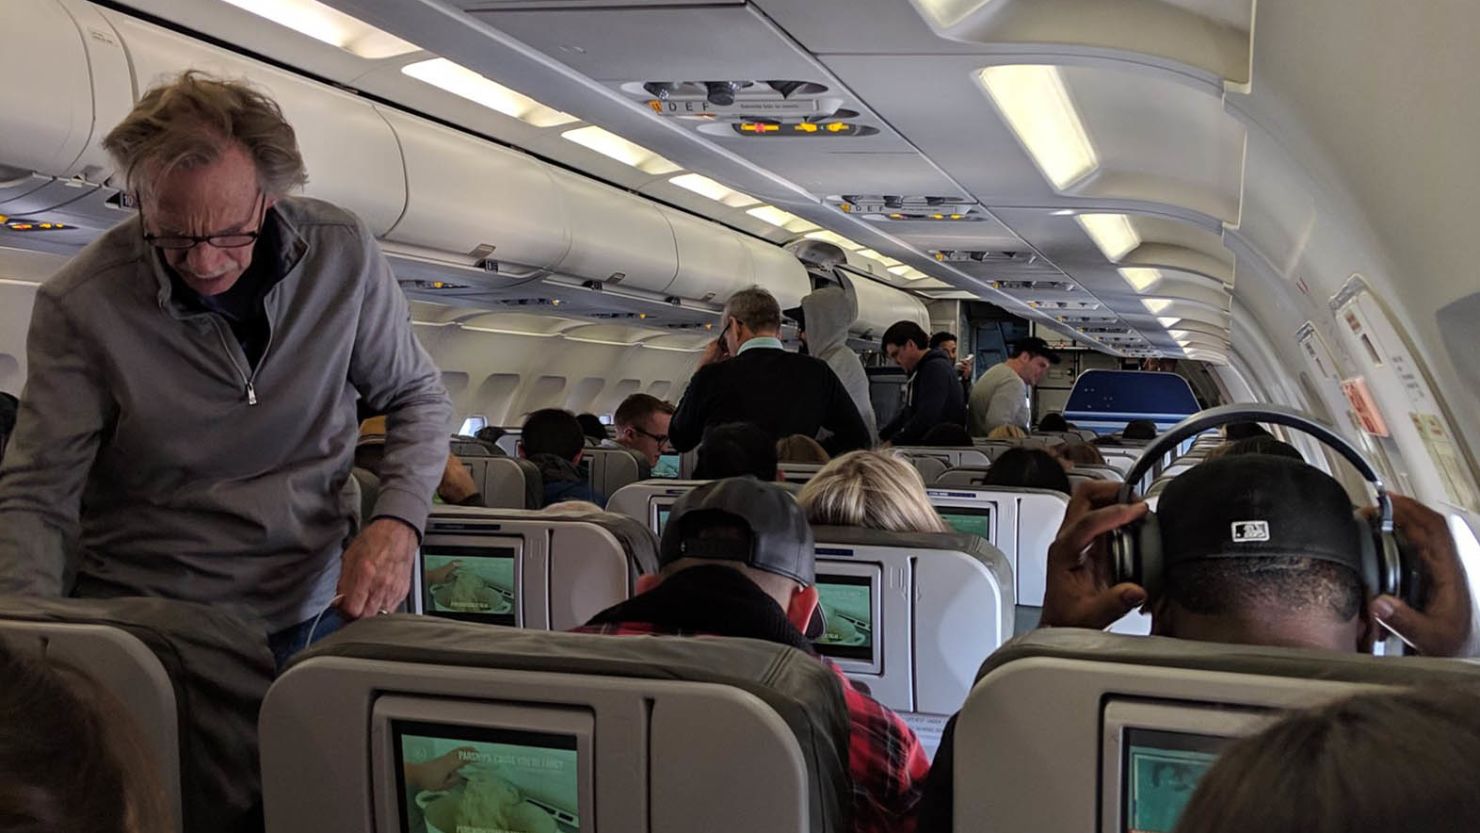 Doug Behm is on a Jet Blue flight 1533 from JFK airport, New York City to Cartagena, Colombia.
He tweeted: "Was supposed to leave at 7.51 AM. Taxied for a while, then back to the gate to refuel. Delayed due to staffing issues caused by the Government shutdown." 